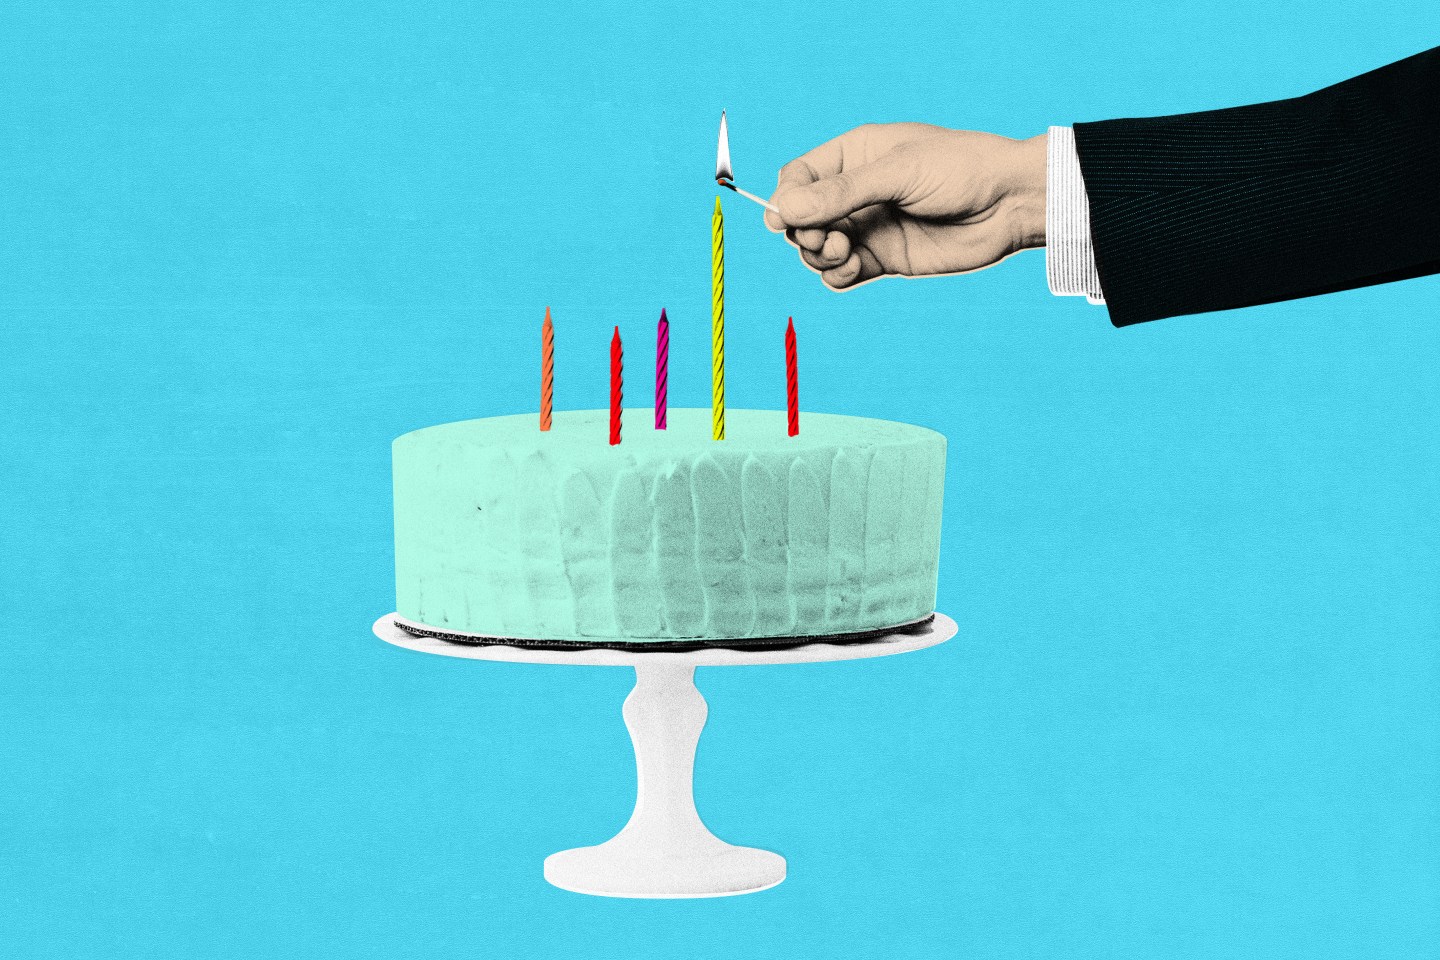 Photo illustration of man's arm in suit lighting birthday candles on cake.